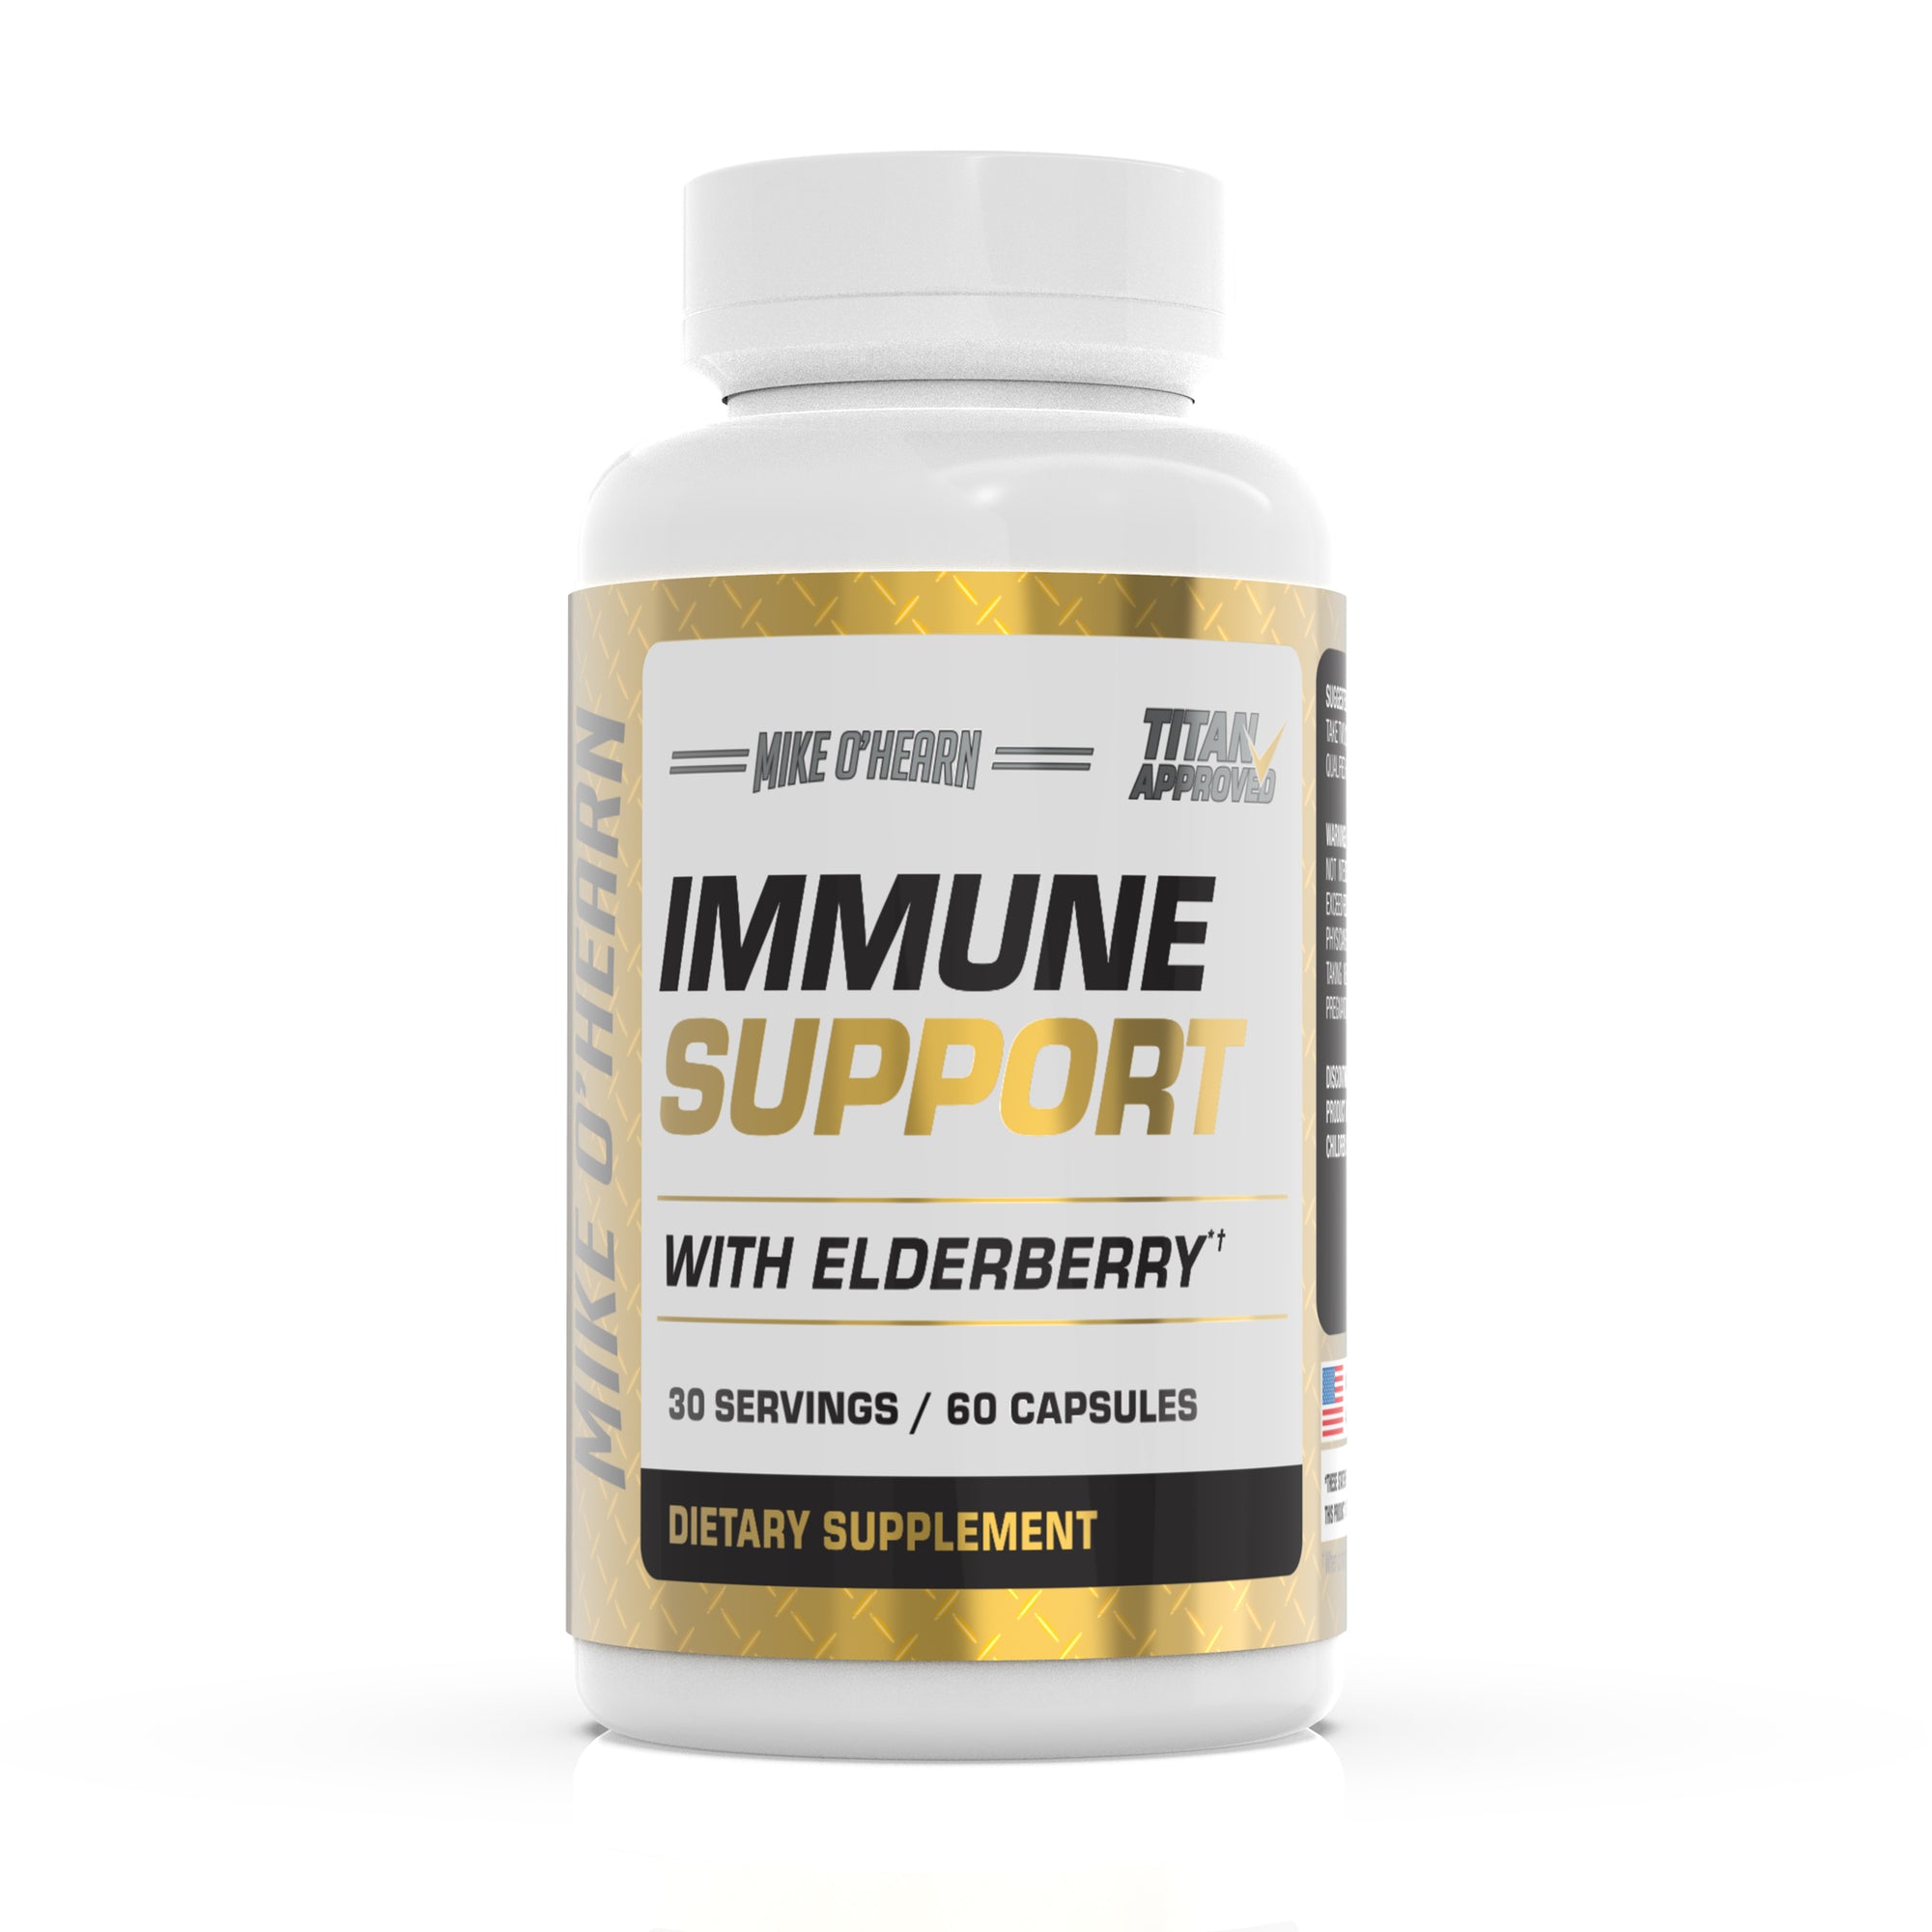 Capsule Bottle Immune Support with Elderberry 30 Servings / 60 capsules Mike O'Hern Titan Approved 